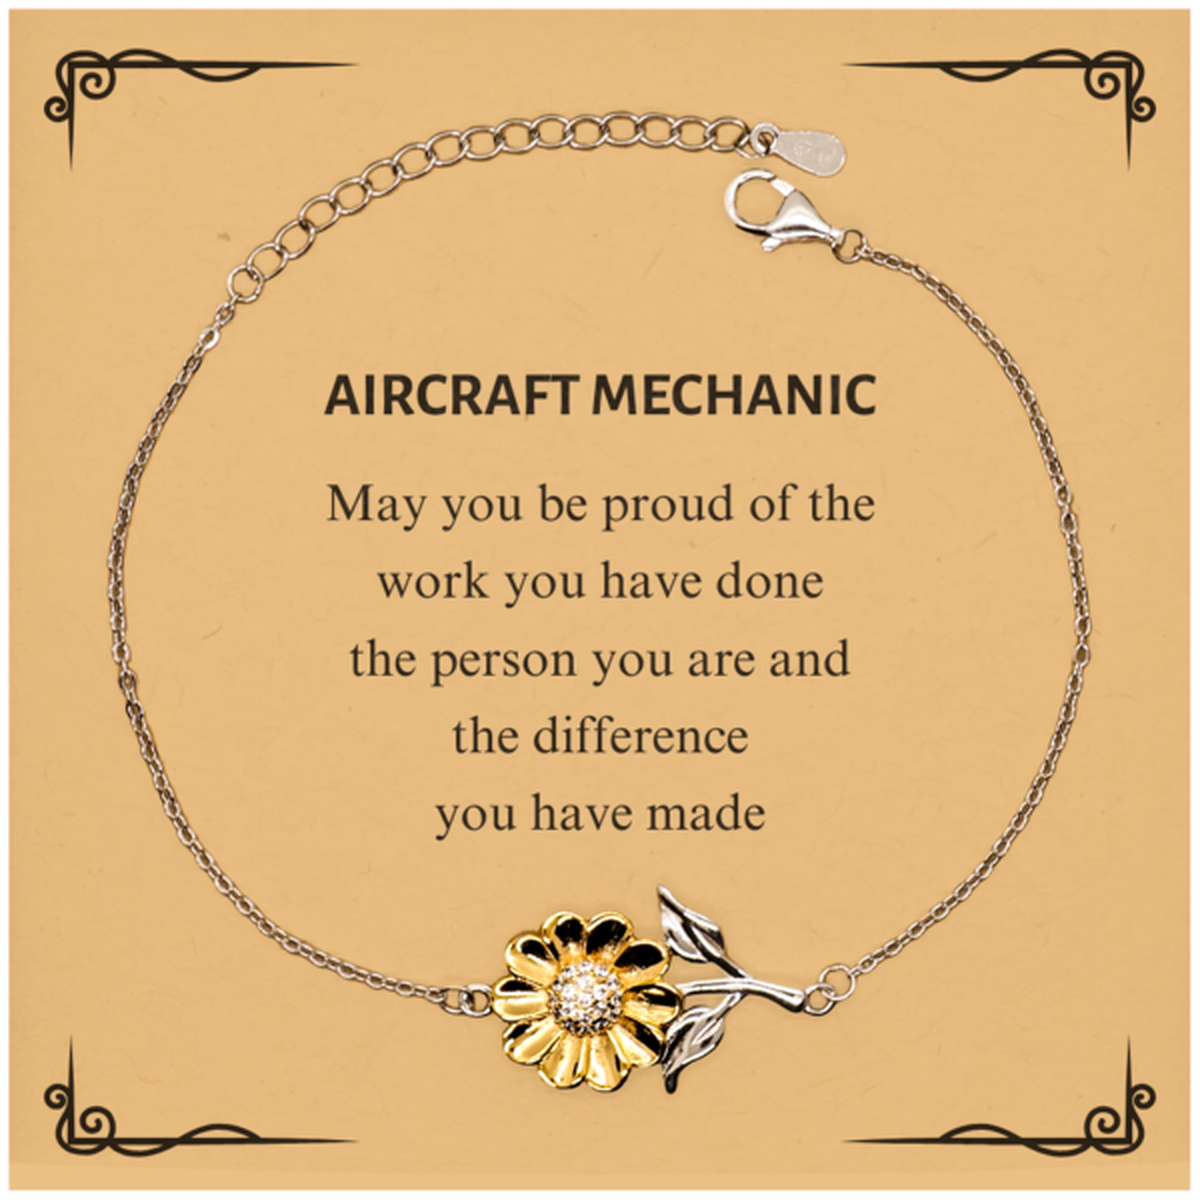 Aircraft Mechanic May you be proud of the work you have done, Retirement Aircraft Mechanic Sunflower Bracelet for Colleague Appreciation Gifts Amazing for Aircraft Mechanic